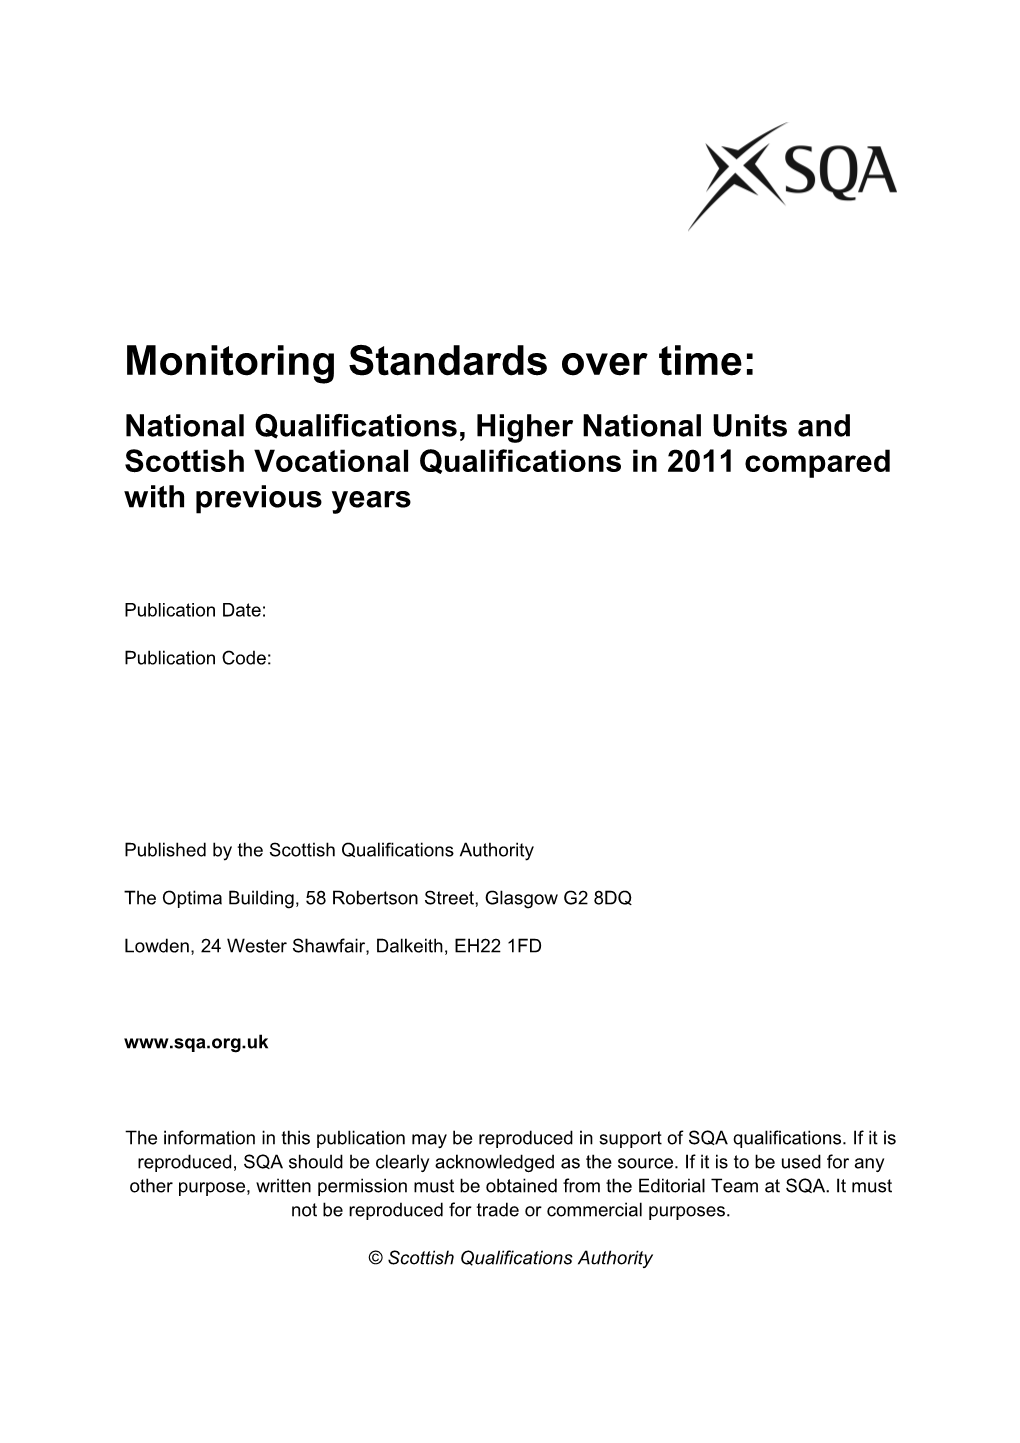 Monitoring Standards Over Time